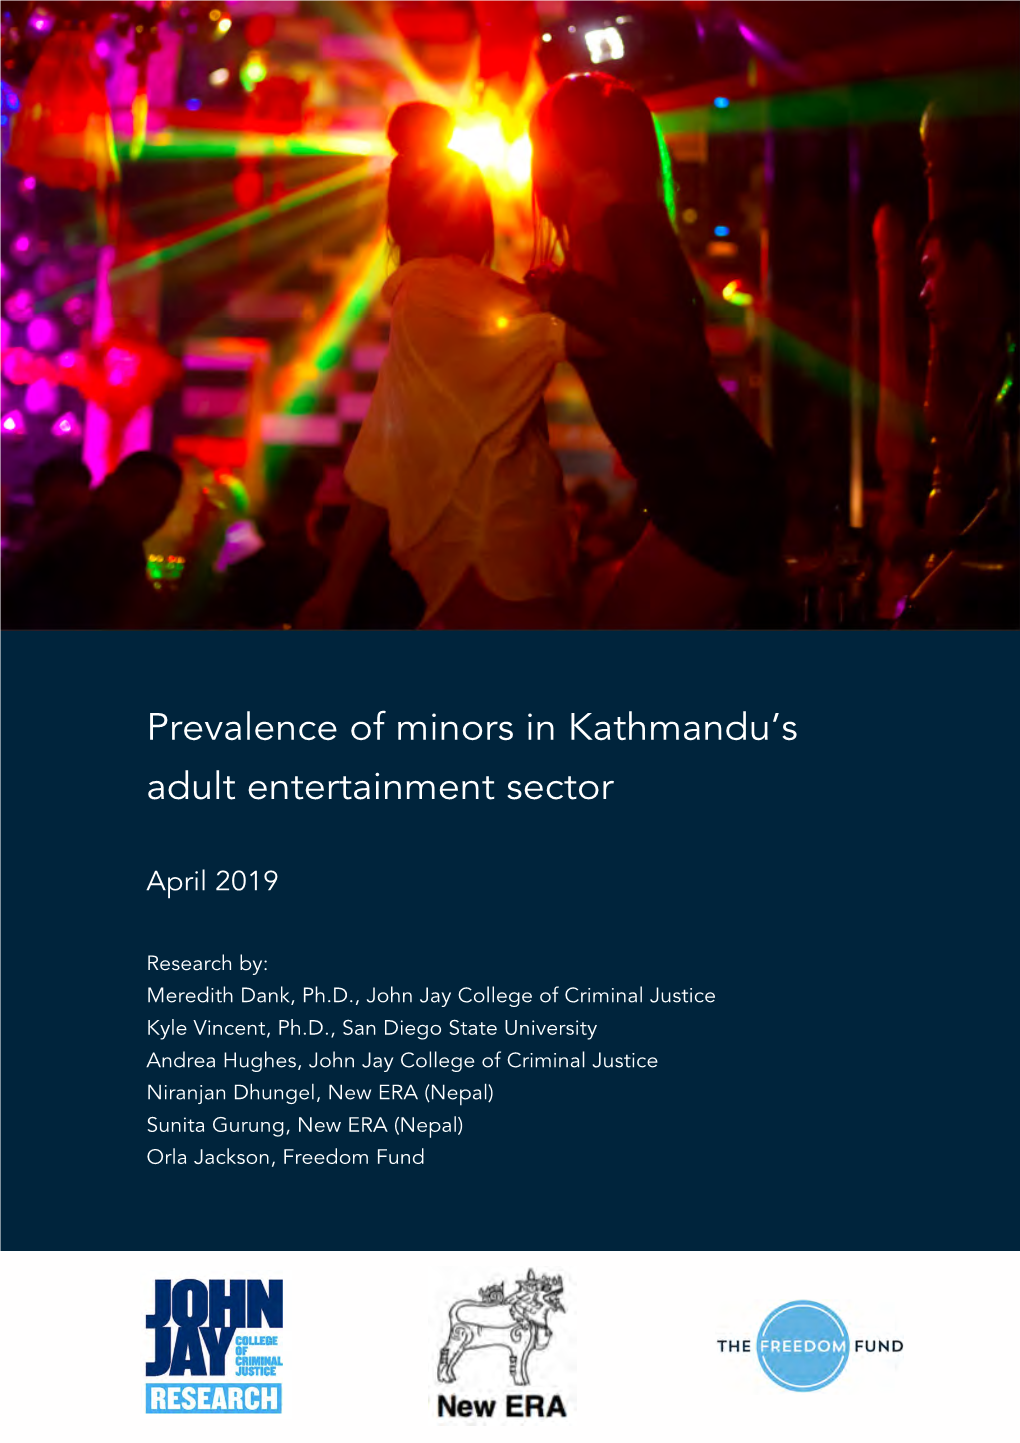 Prevalence of Minors in Kathmandu's Adult Entertainment Sector